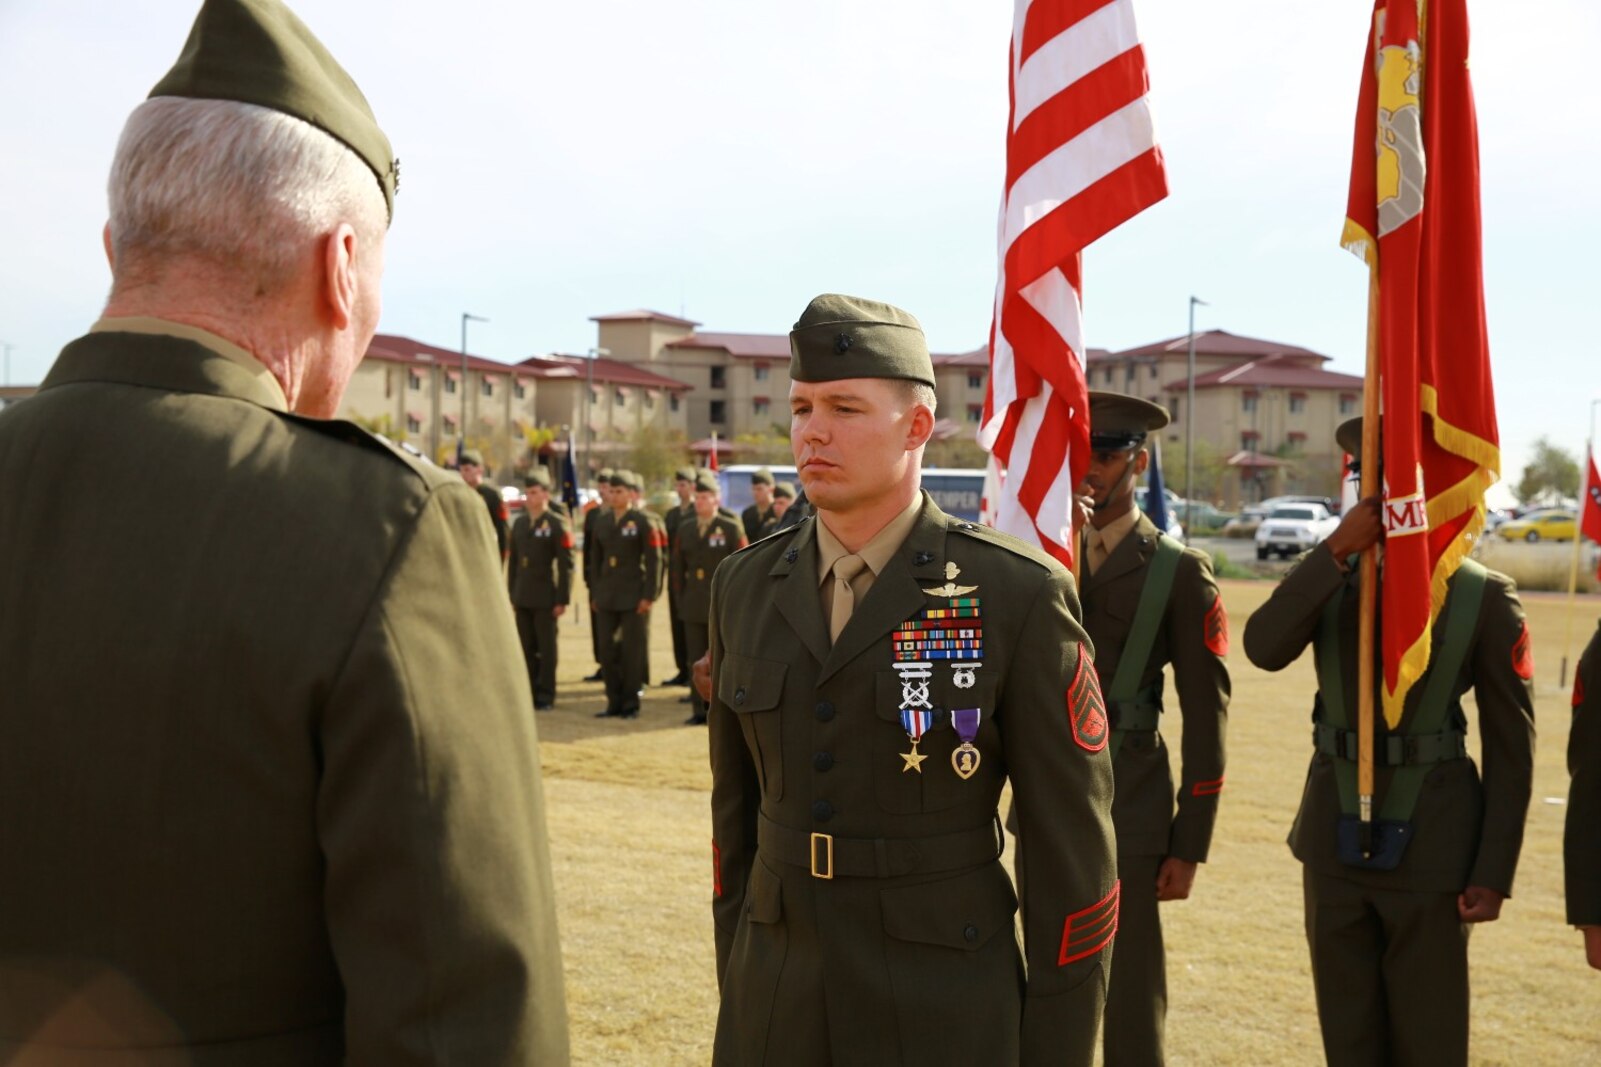 Staff Sgt. Timothy Williams, a section leader with 1st Reconnaissance Battalion, receives the Silver Star Medal and Purple Heart from Lt. Gen. John Toolan, commanding general of I Marine Expeditionary Force, during an award ceremony held at Camp Las Flores, Marine Corps Base Camp Pendleton, Calif., Jan. 7, 2014. Williams, a native of Hudson, Mich., was recognized for his heroic actions in Afghanistan when he maintained a tactical advantage while being ambushed by a larger enemy force. Williams helped save the lives of multiple Marines and destroyed several enemy positions during the 10 hour attack. (U.S Marine Corps photo by Lance Cpl. Jonathan Boynes/released)